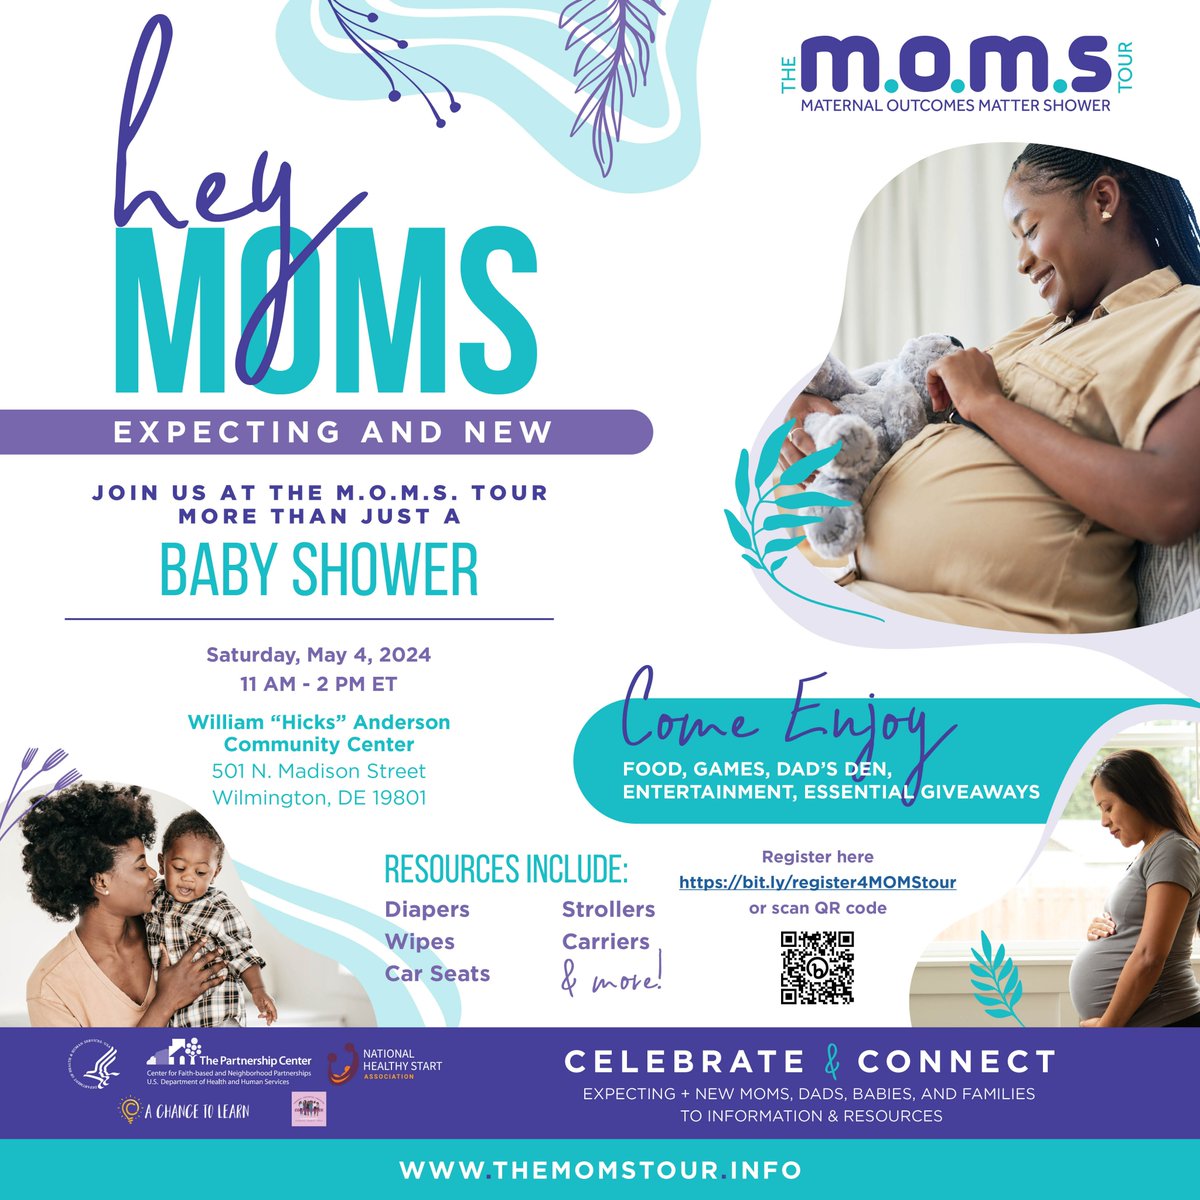 Calling all Moms and Dads in Wilmington! The M.O.M.S. Tour community baby shower will be at the Williams Hicks Anderson Community Center on May 4. @CocoLifeBlack @hhsregion3 @cityofwilmde #maternalhealth